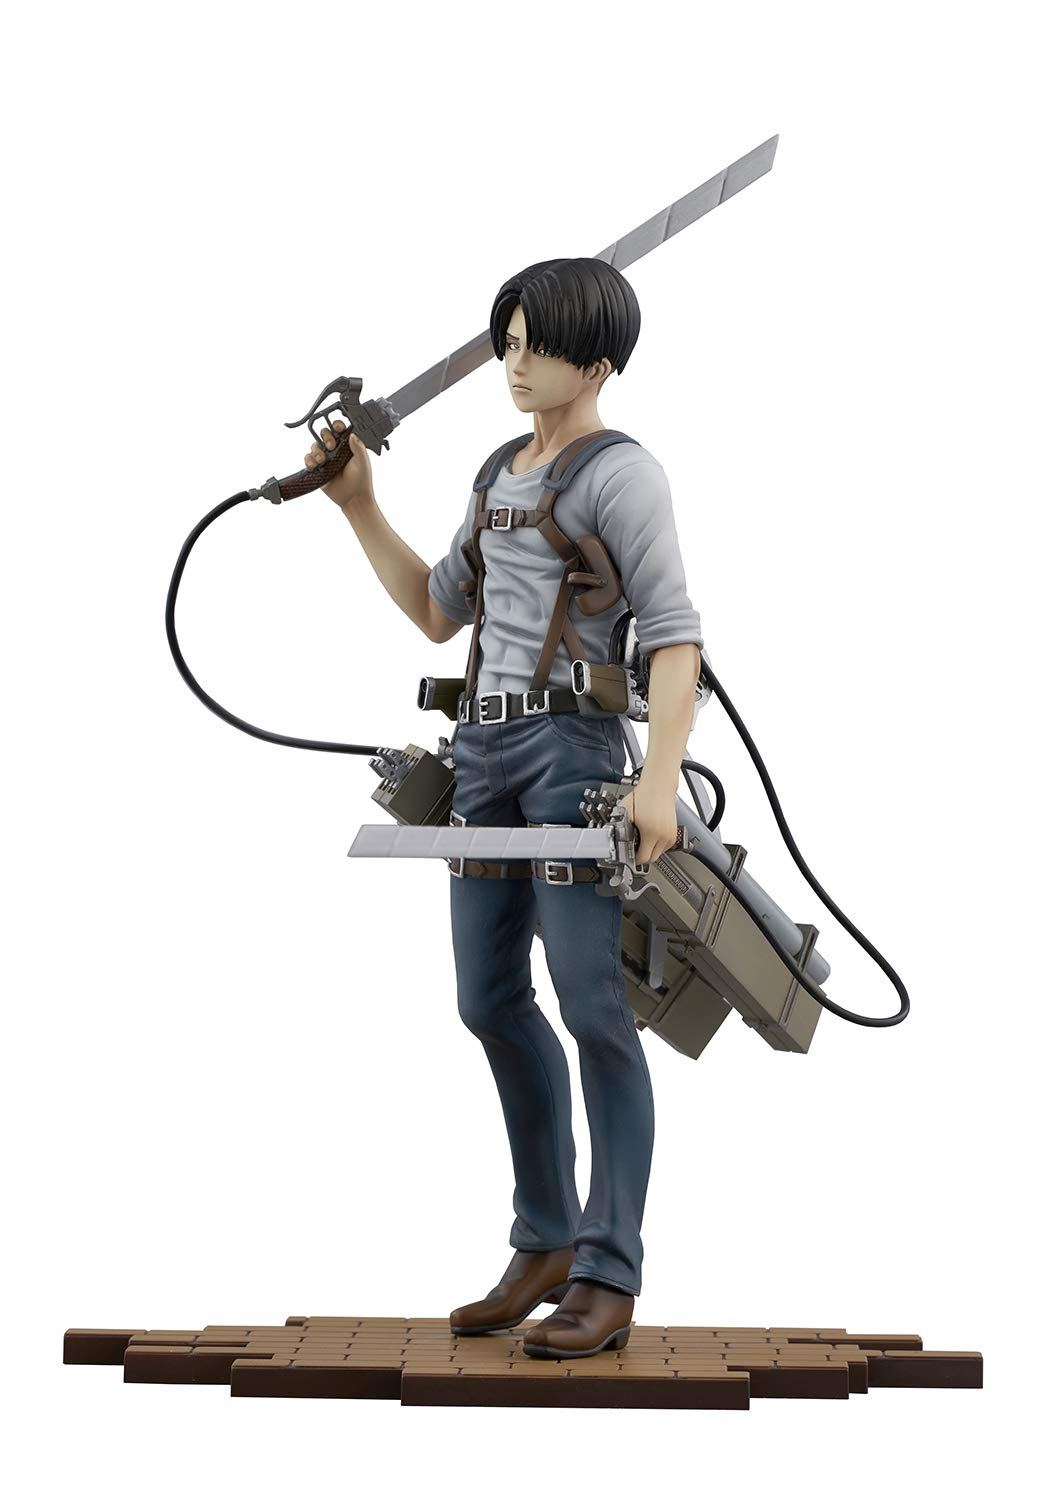 BRAVE-ACT ATTACK ON TITAN 1/8 SCALE PRE-PAINTED FIGURE: LEVI -VER. 2B- Sentinel